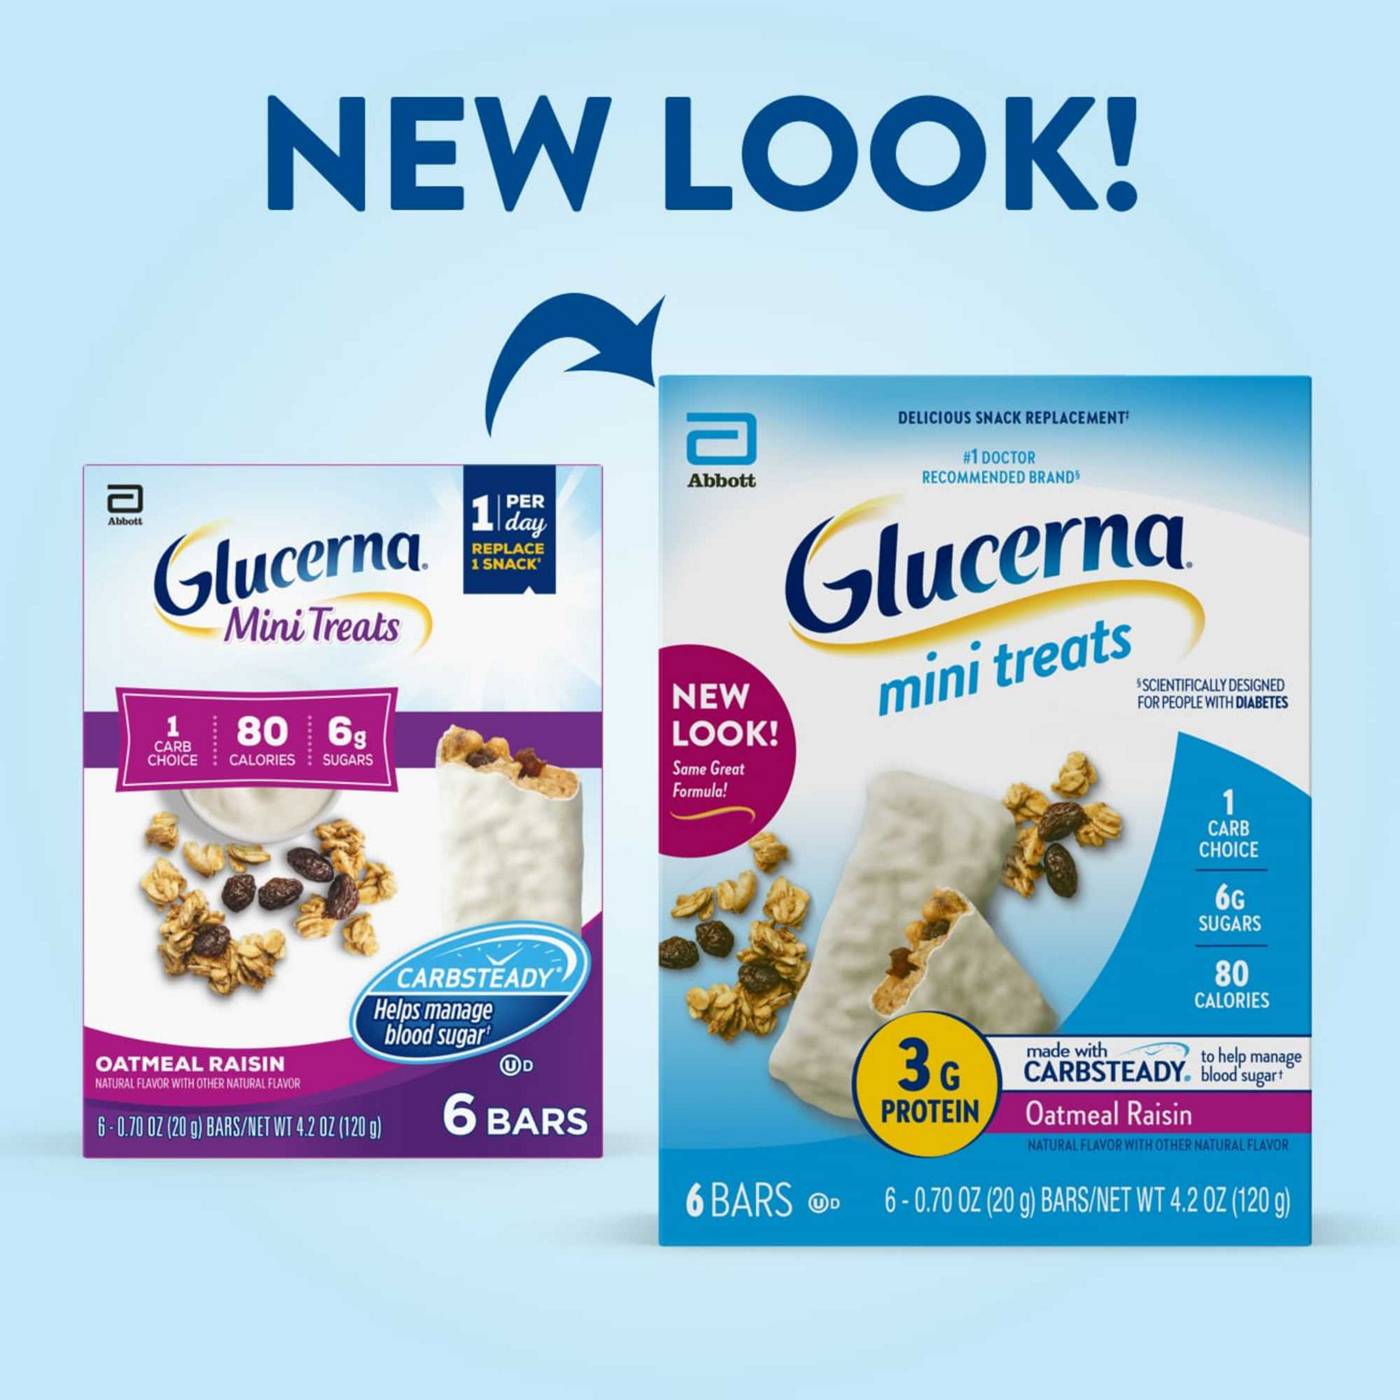 Glucerna Mini Treats, Diabetic Snack Replacement to Support Blood Sugar Management, Oatmeal Raisin; image 9 of 9